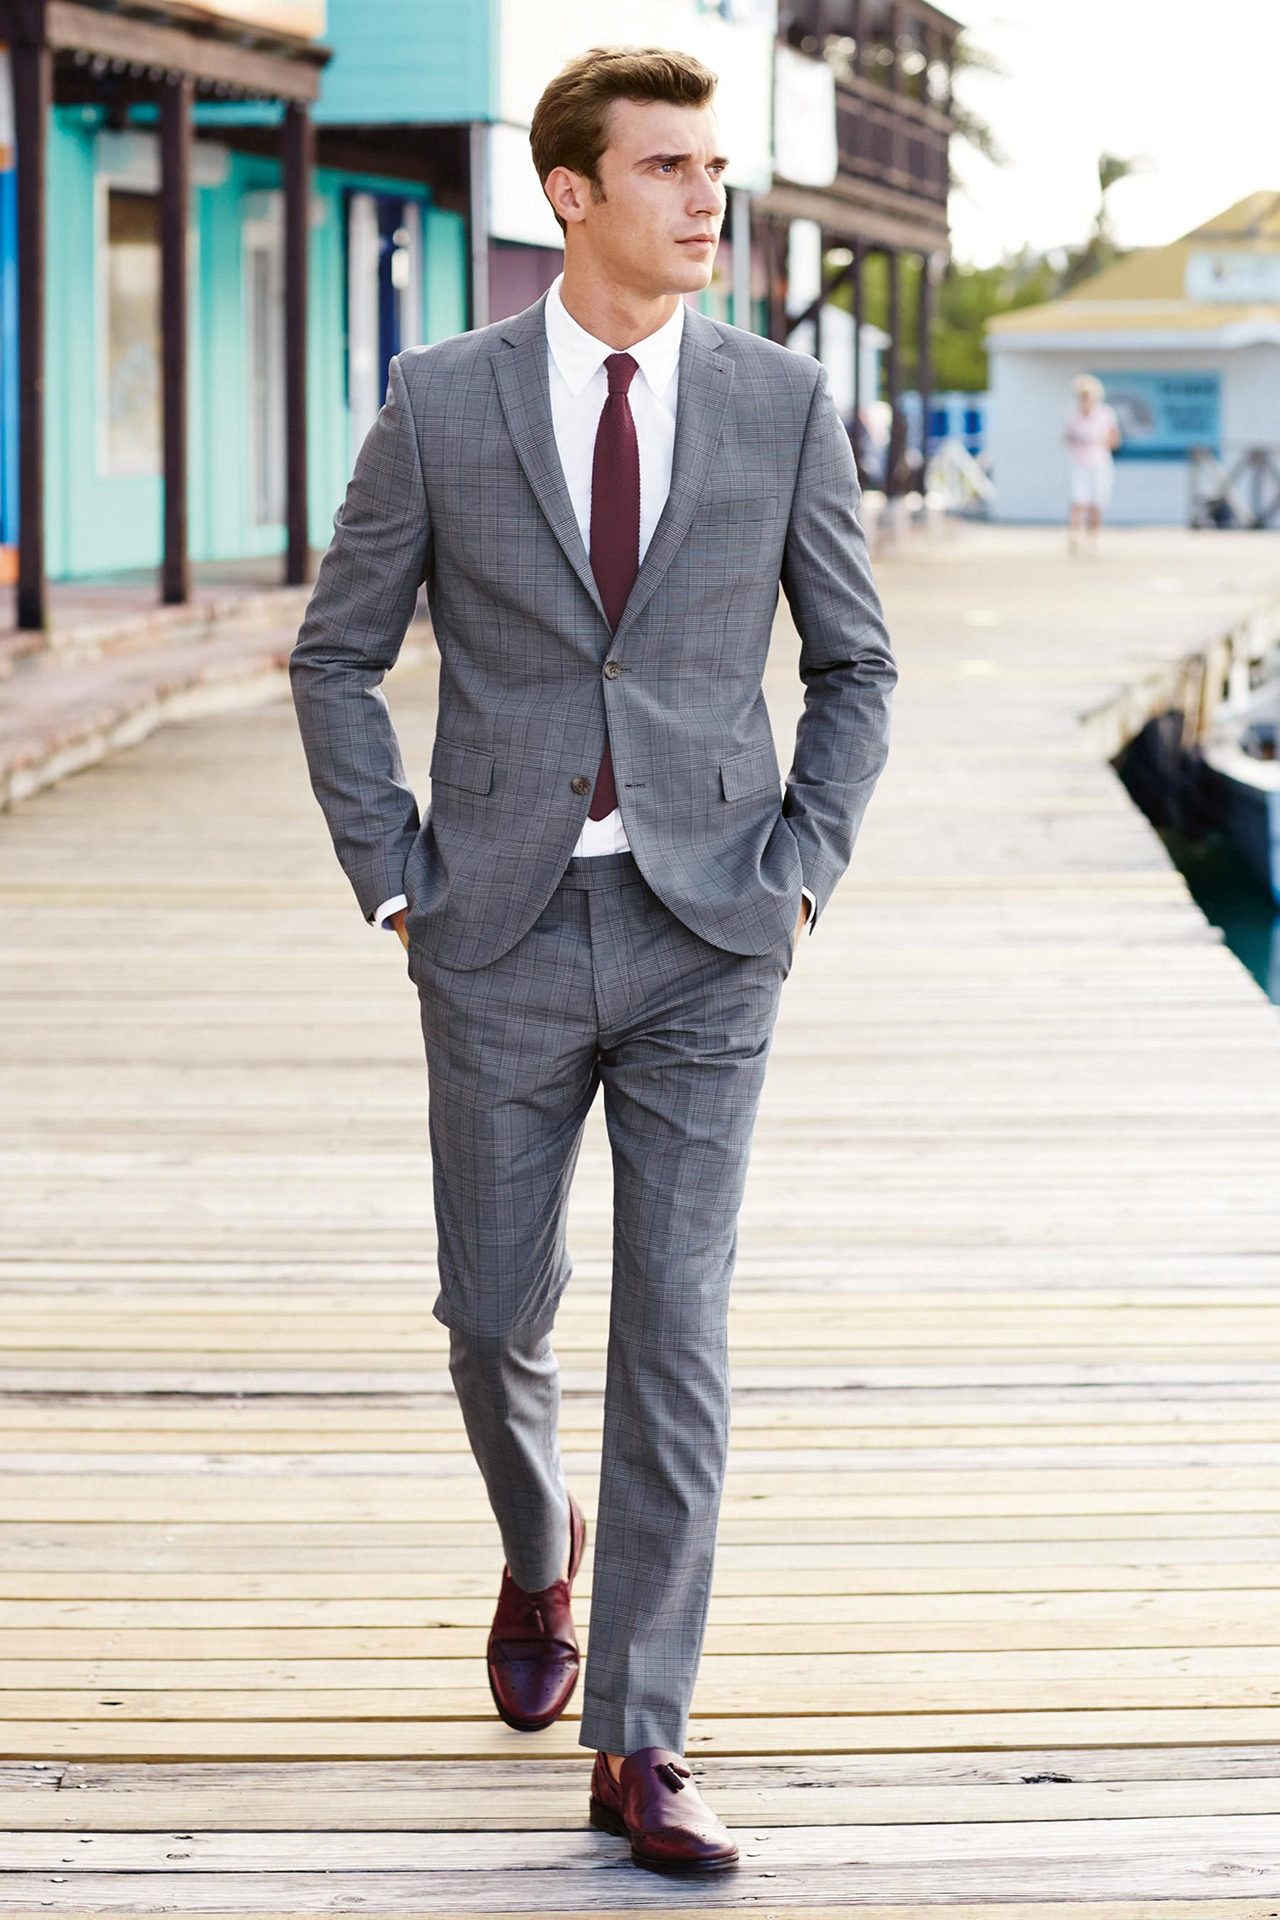 Burgundy loafers with a light gray suit and white shirt